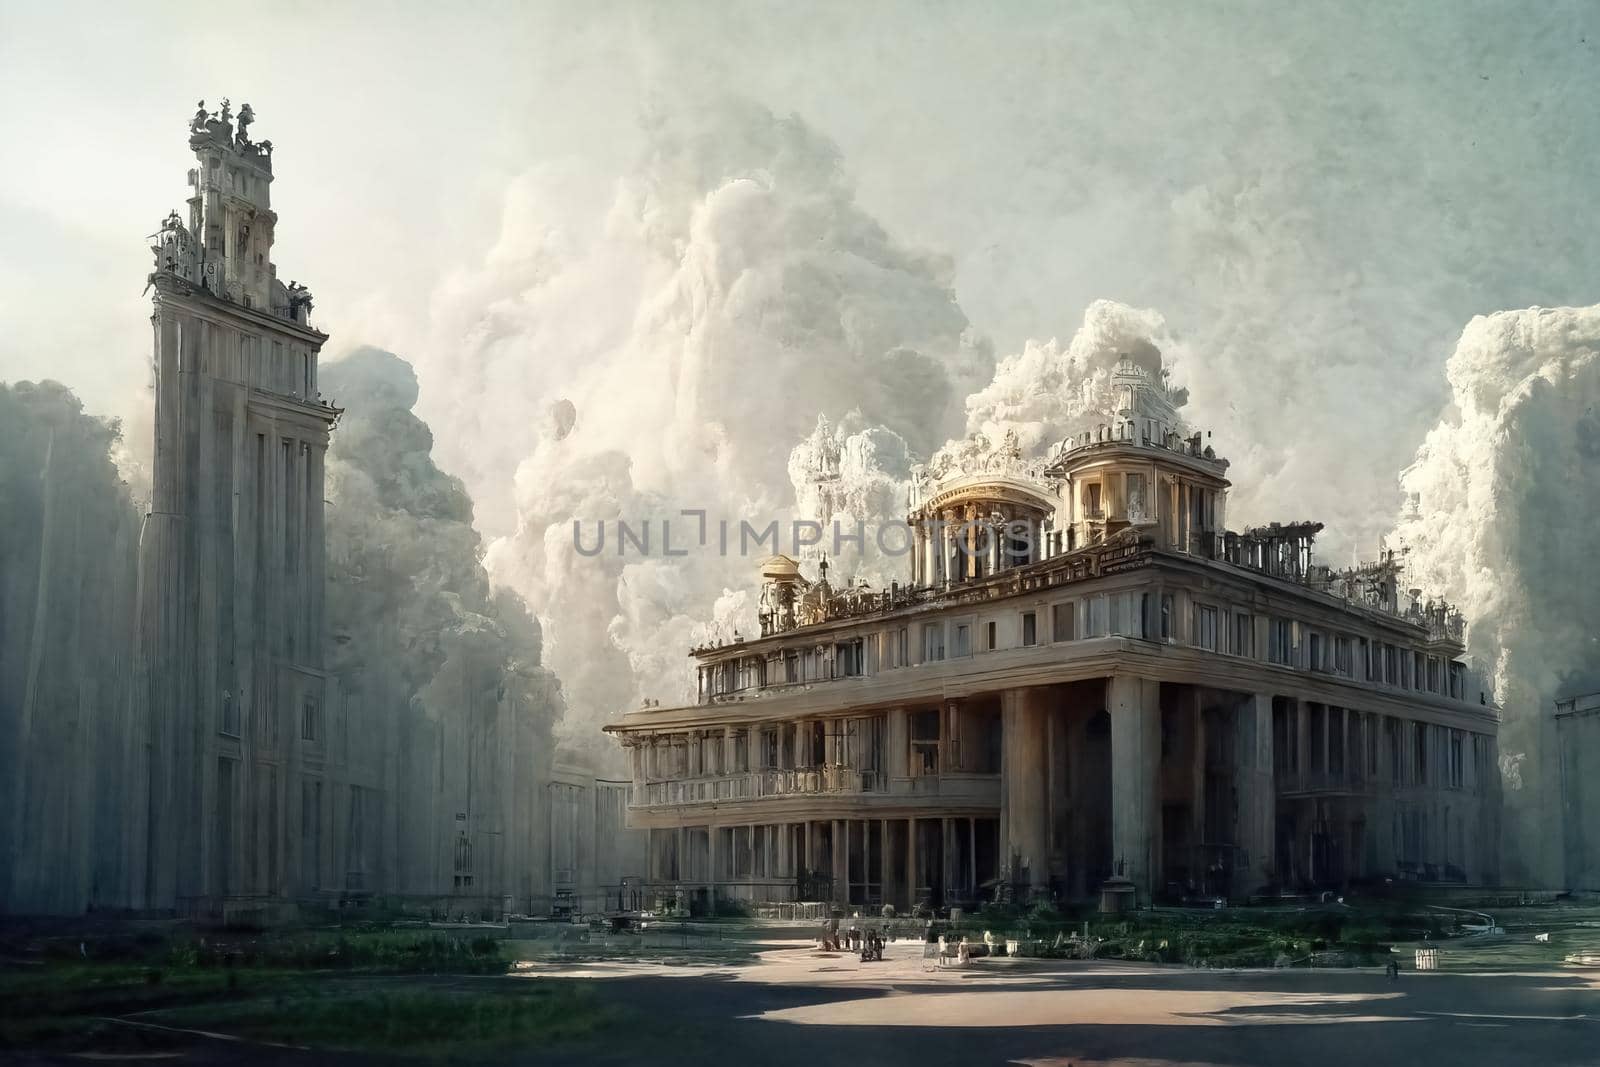 Neoclassical style architecture, digital art, 3d illustration by Farcas